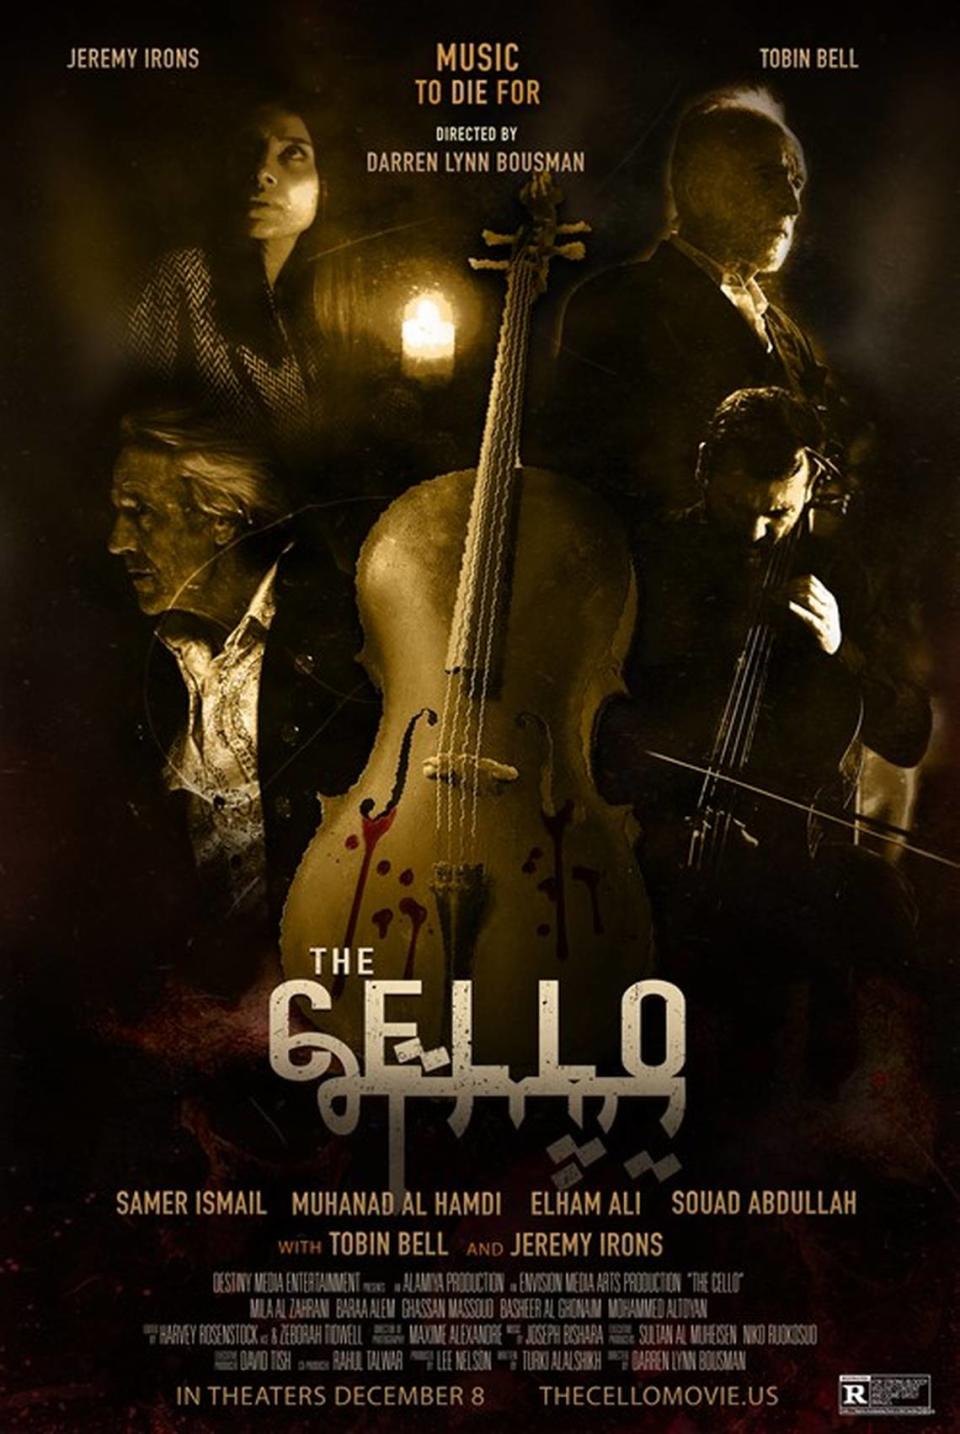 “The Cello,” based on a novel by Saudi poet and writer Turki Alalshikha, is scheduled to open Dec. 8 in theaters nationwide.